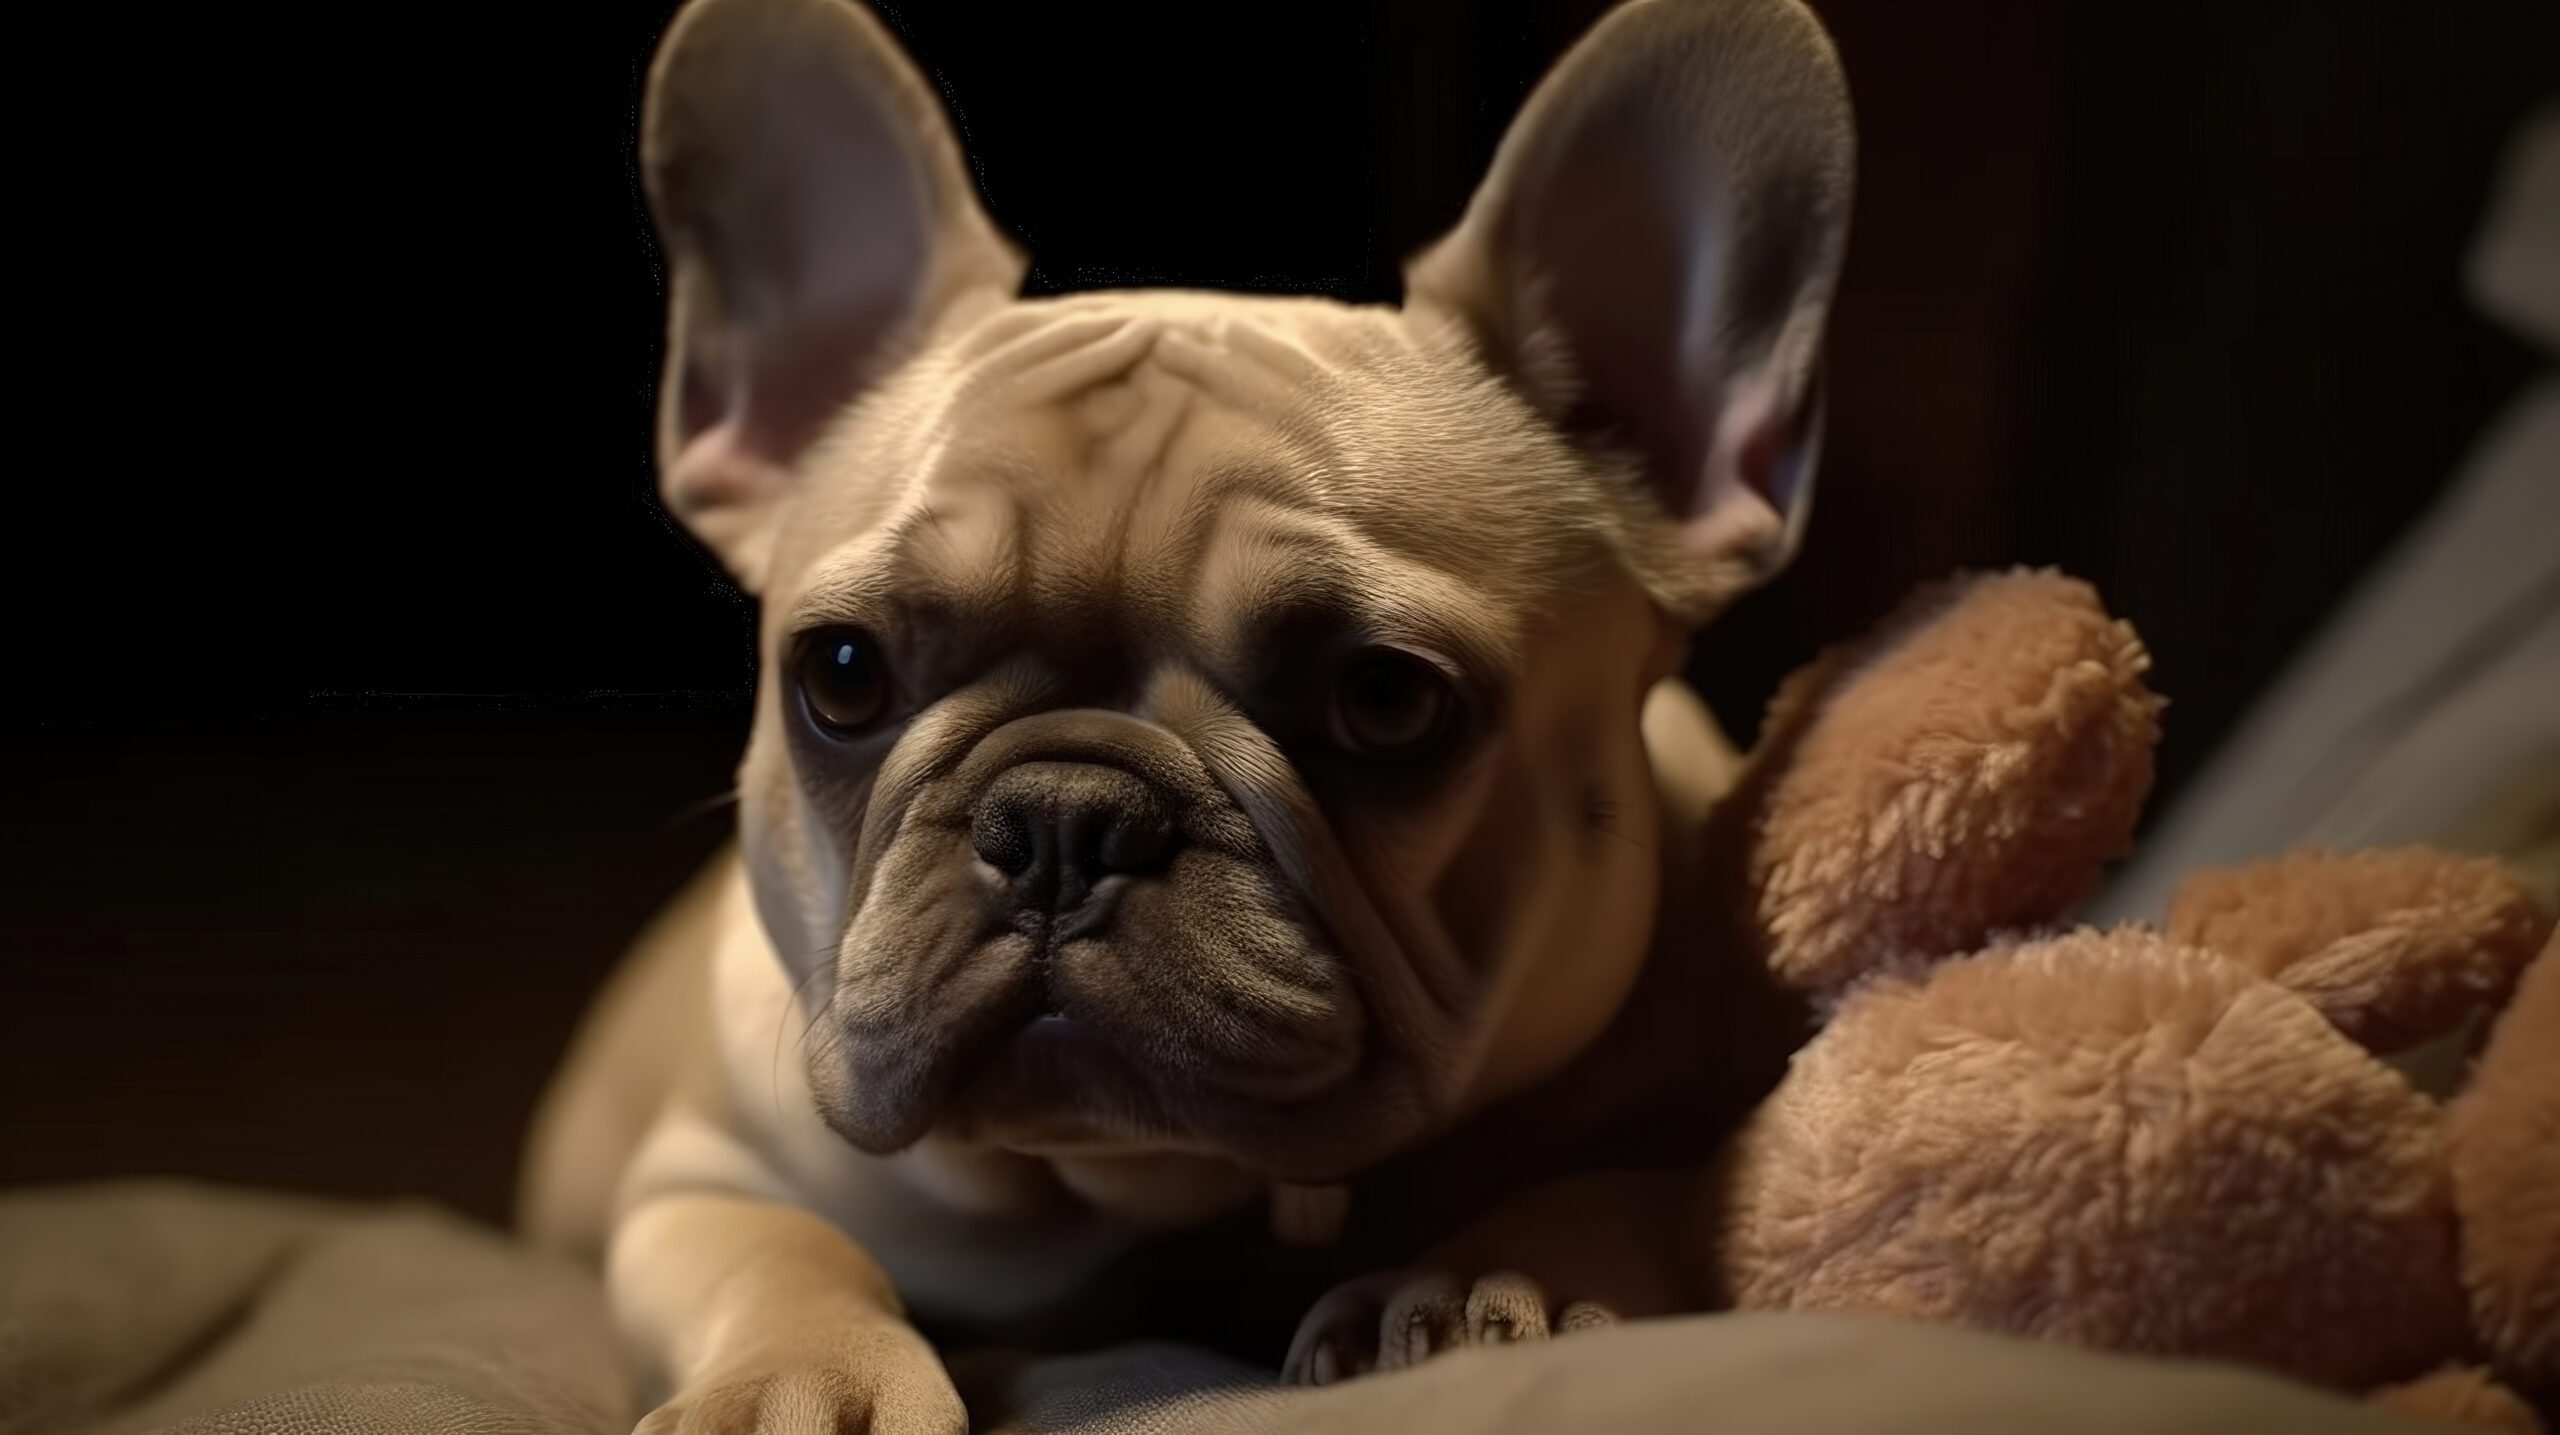 super cute frenchie bulldog laying on a brown bed with a stuffed teddy bear